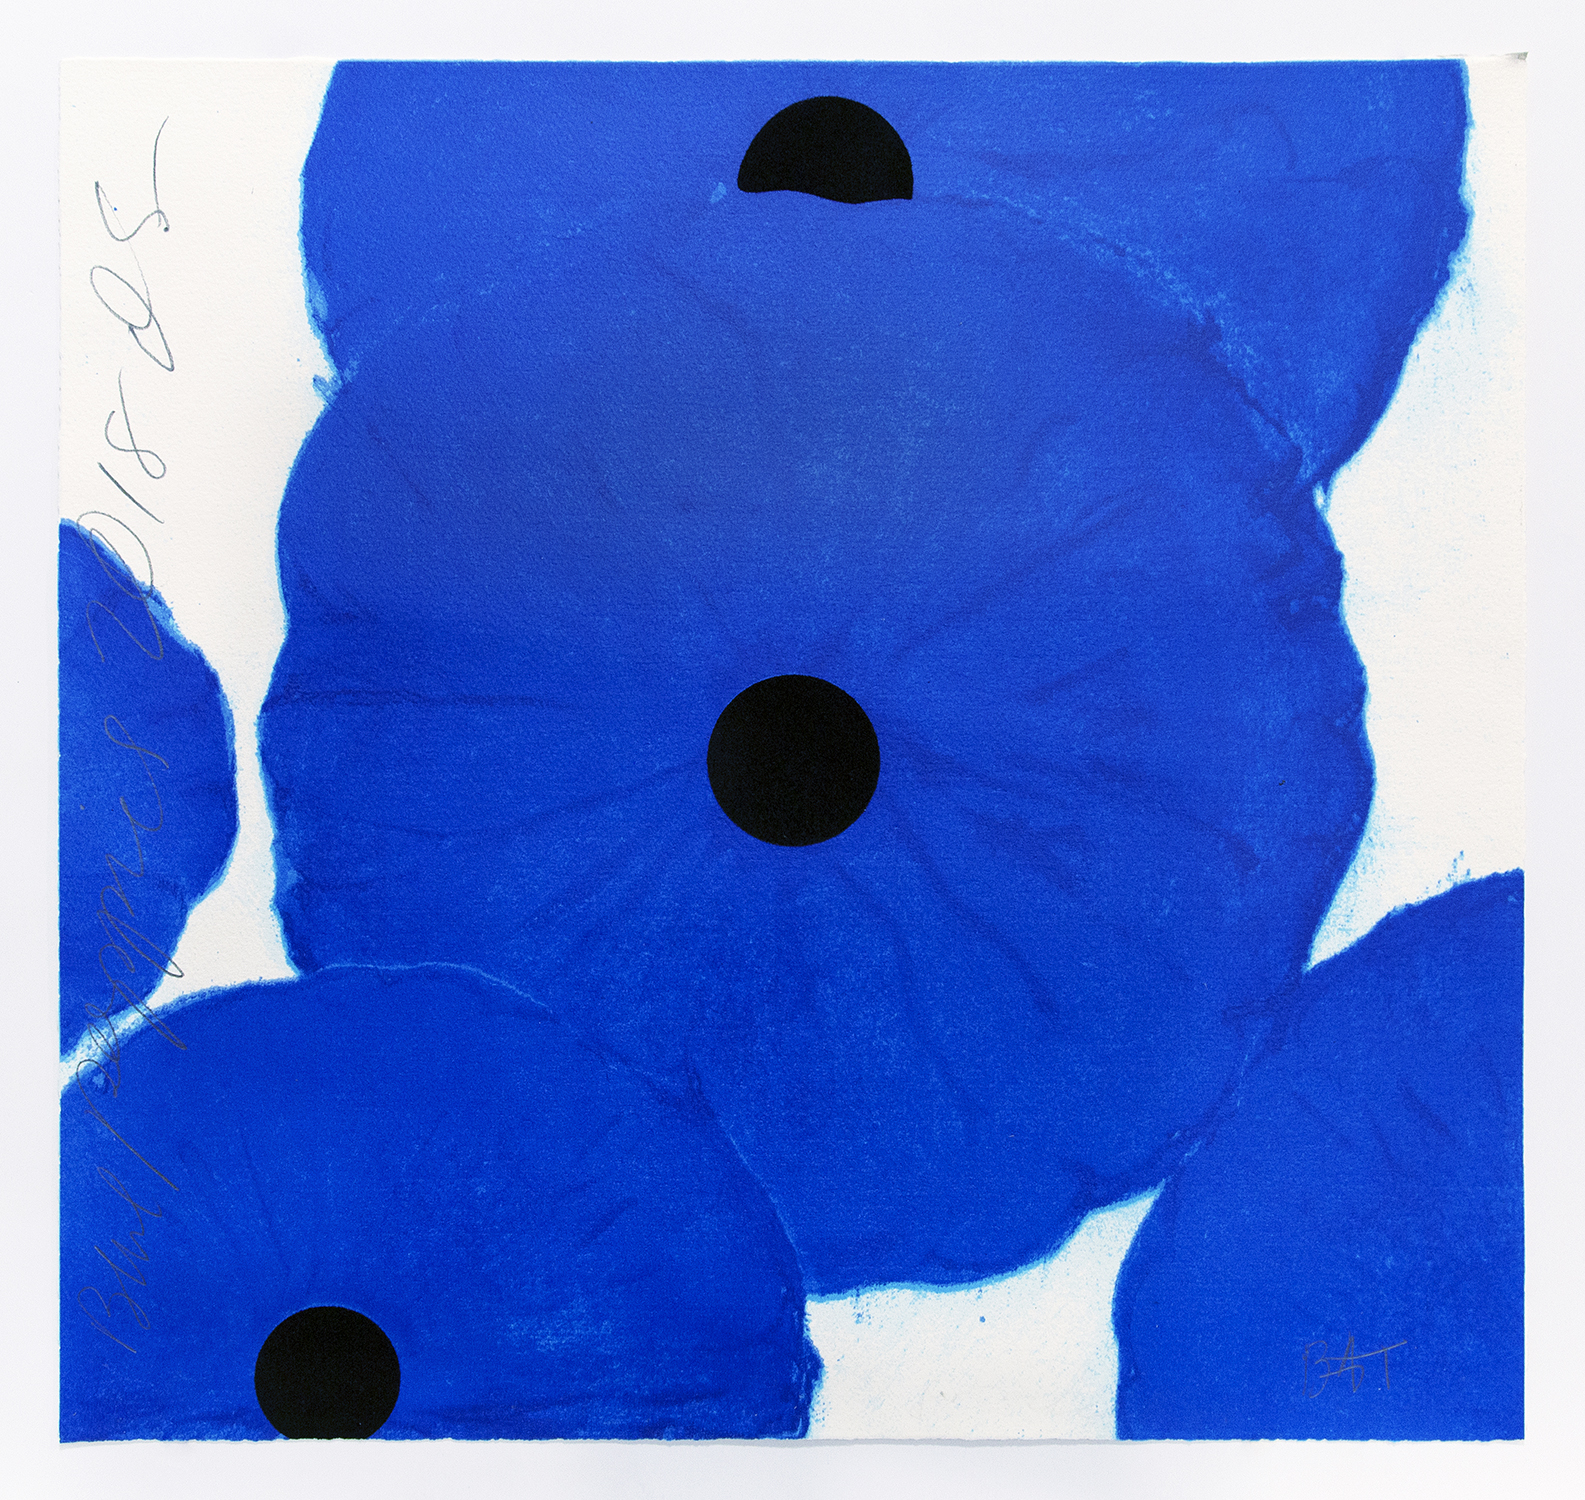 Blue Poppies, 2018, Screenprint in 11 colors with flocking, 19 x 20 inches (48.3 x 50.8 cm), Edition of 80